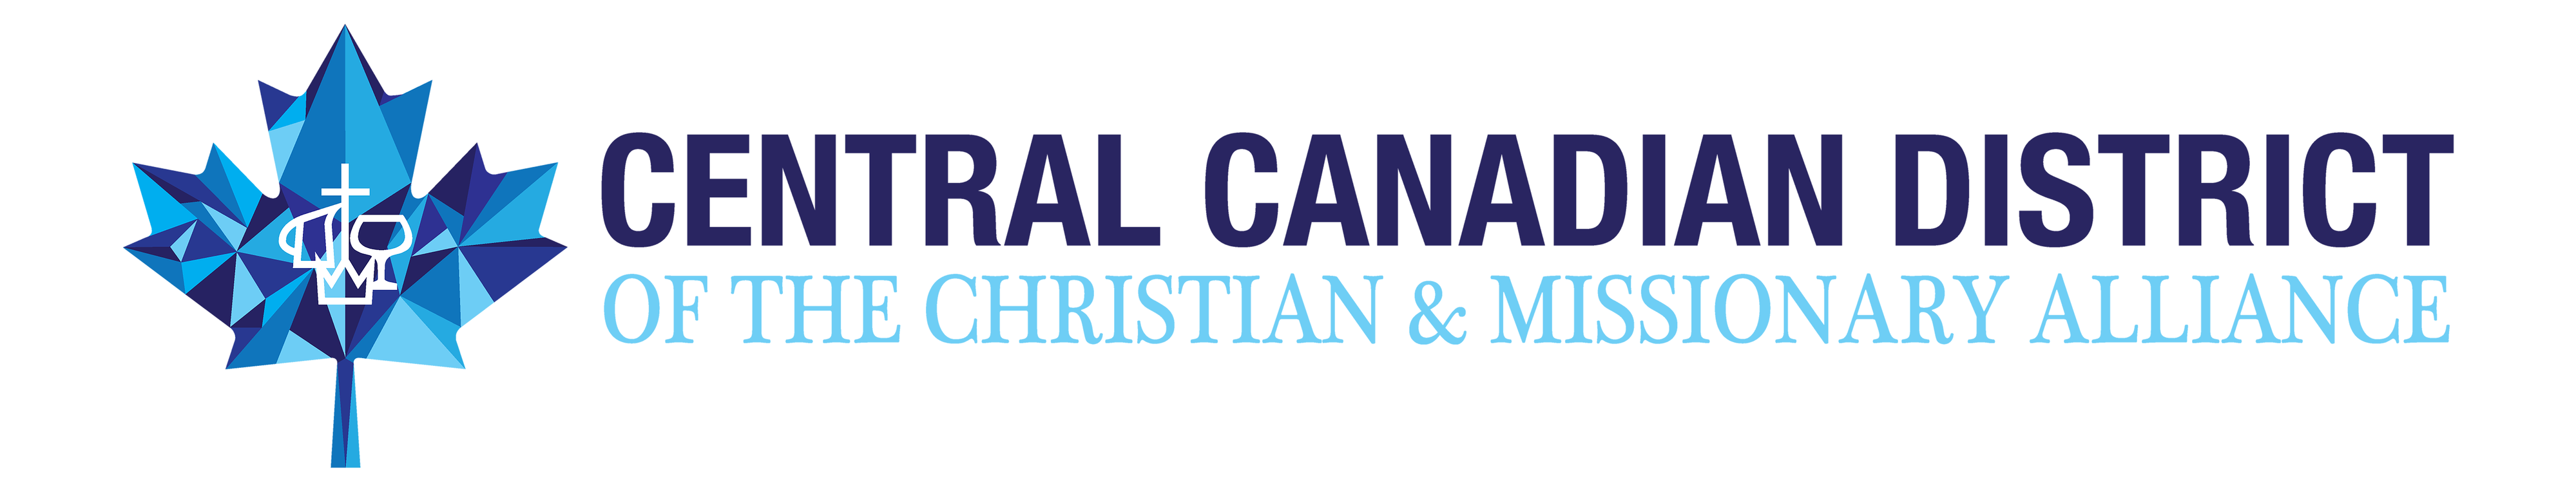 Christian and Missionary Alliance Canada-Central District